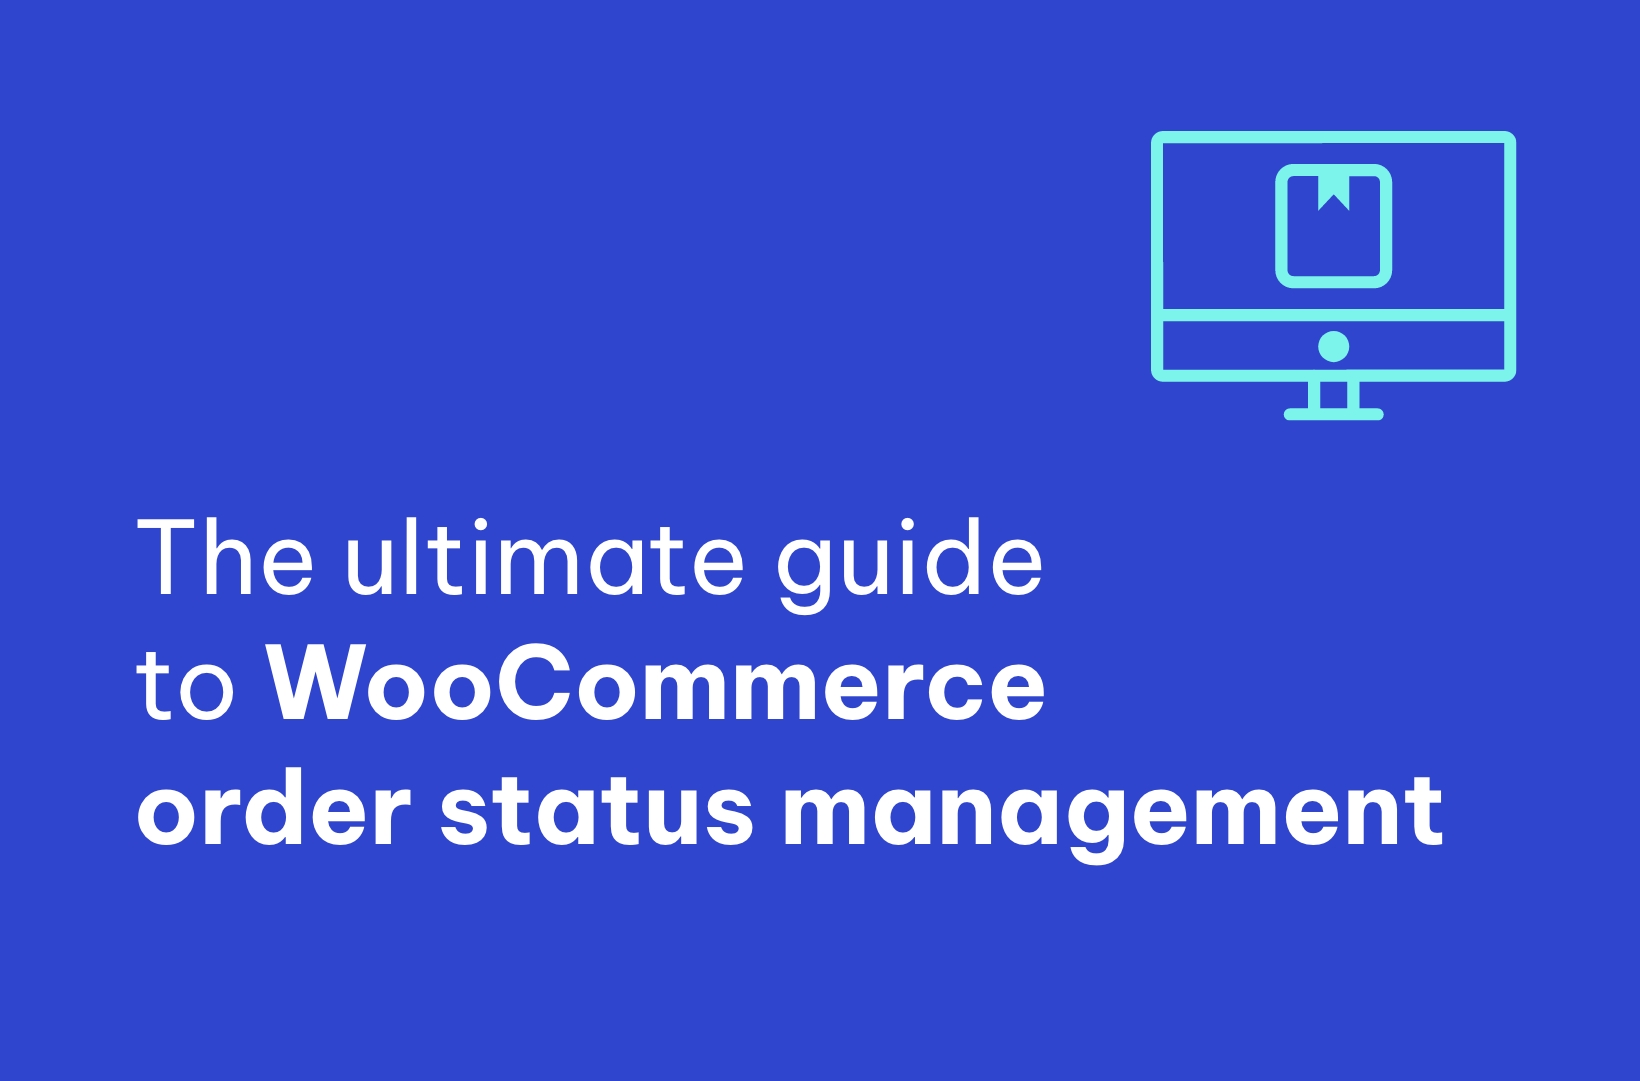 The Ultimate Guide to WooCommerce Order Status Management